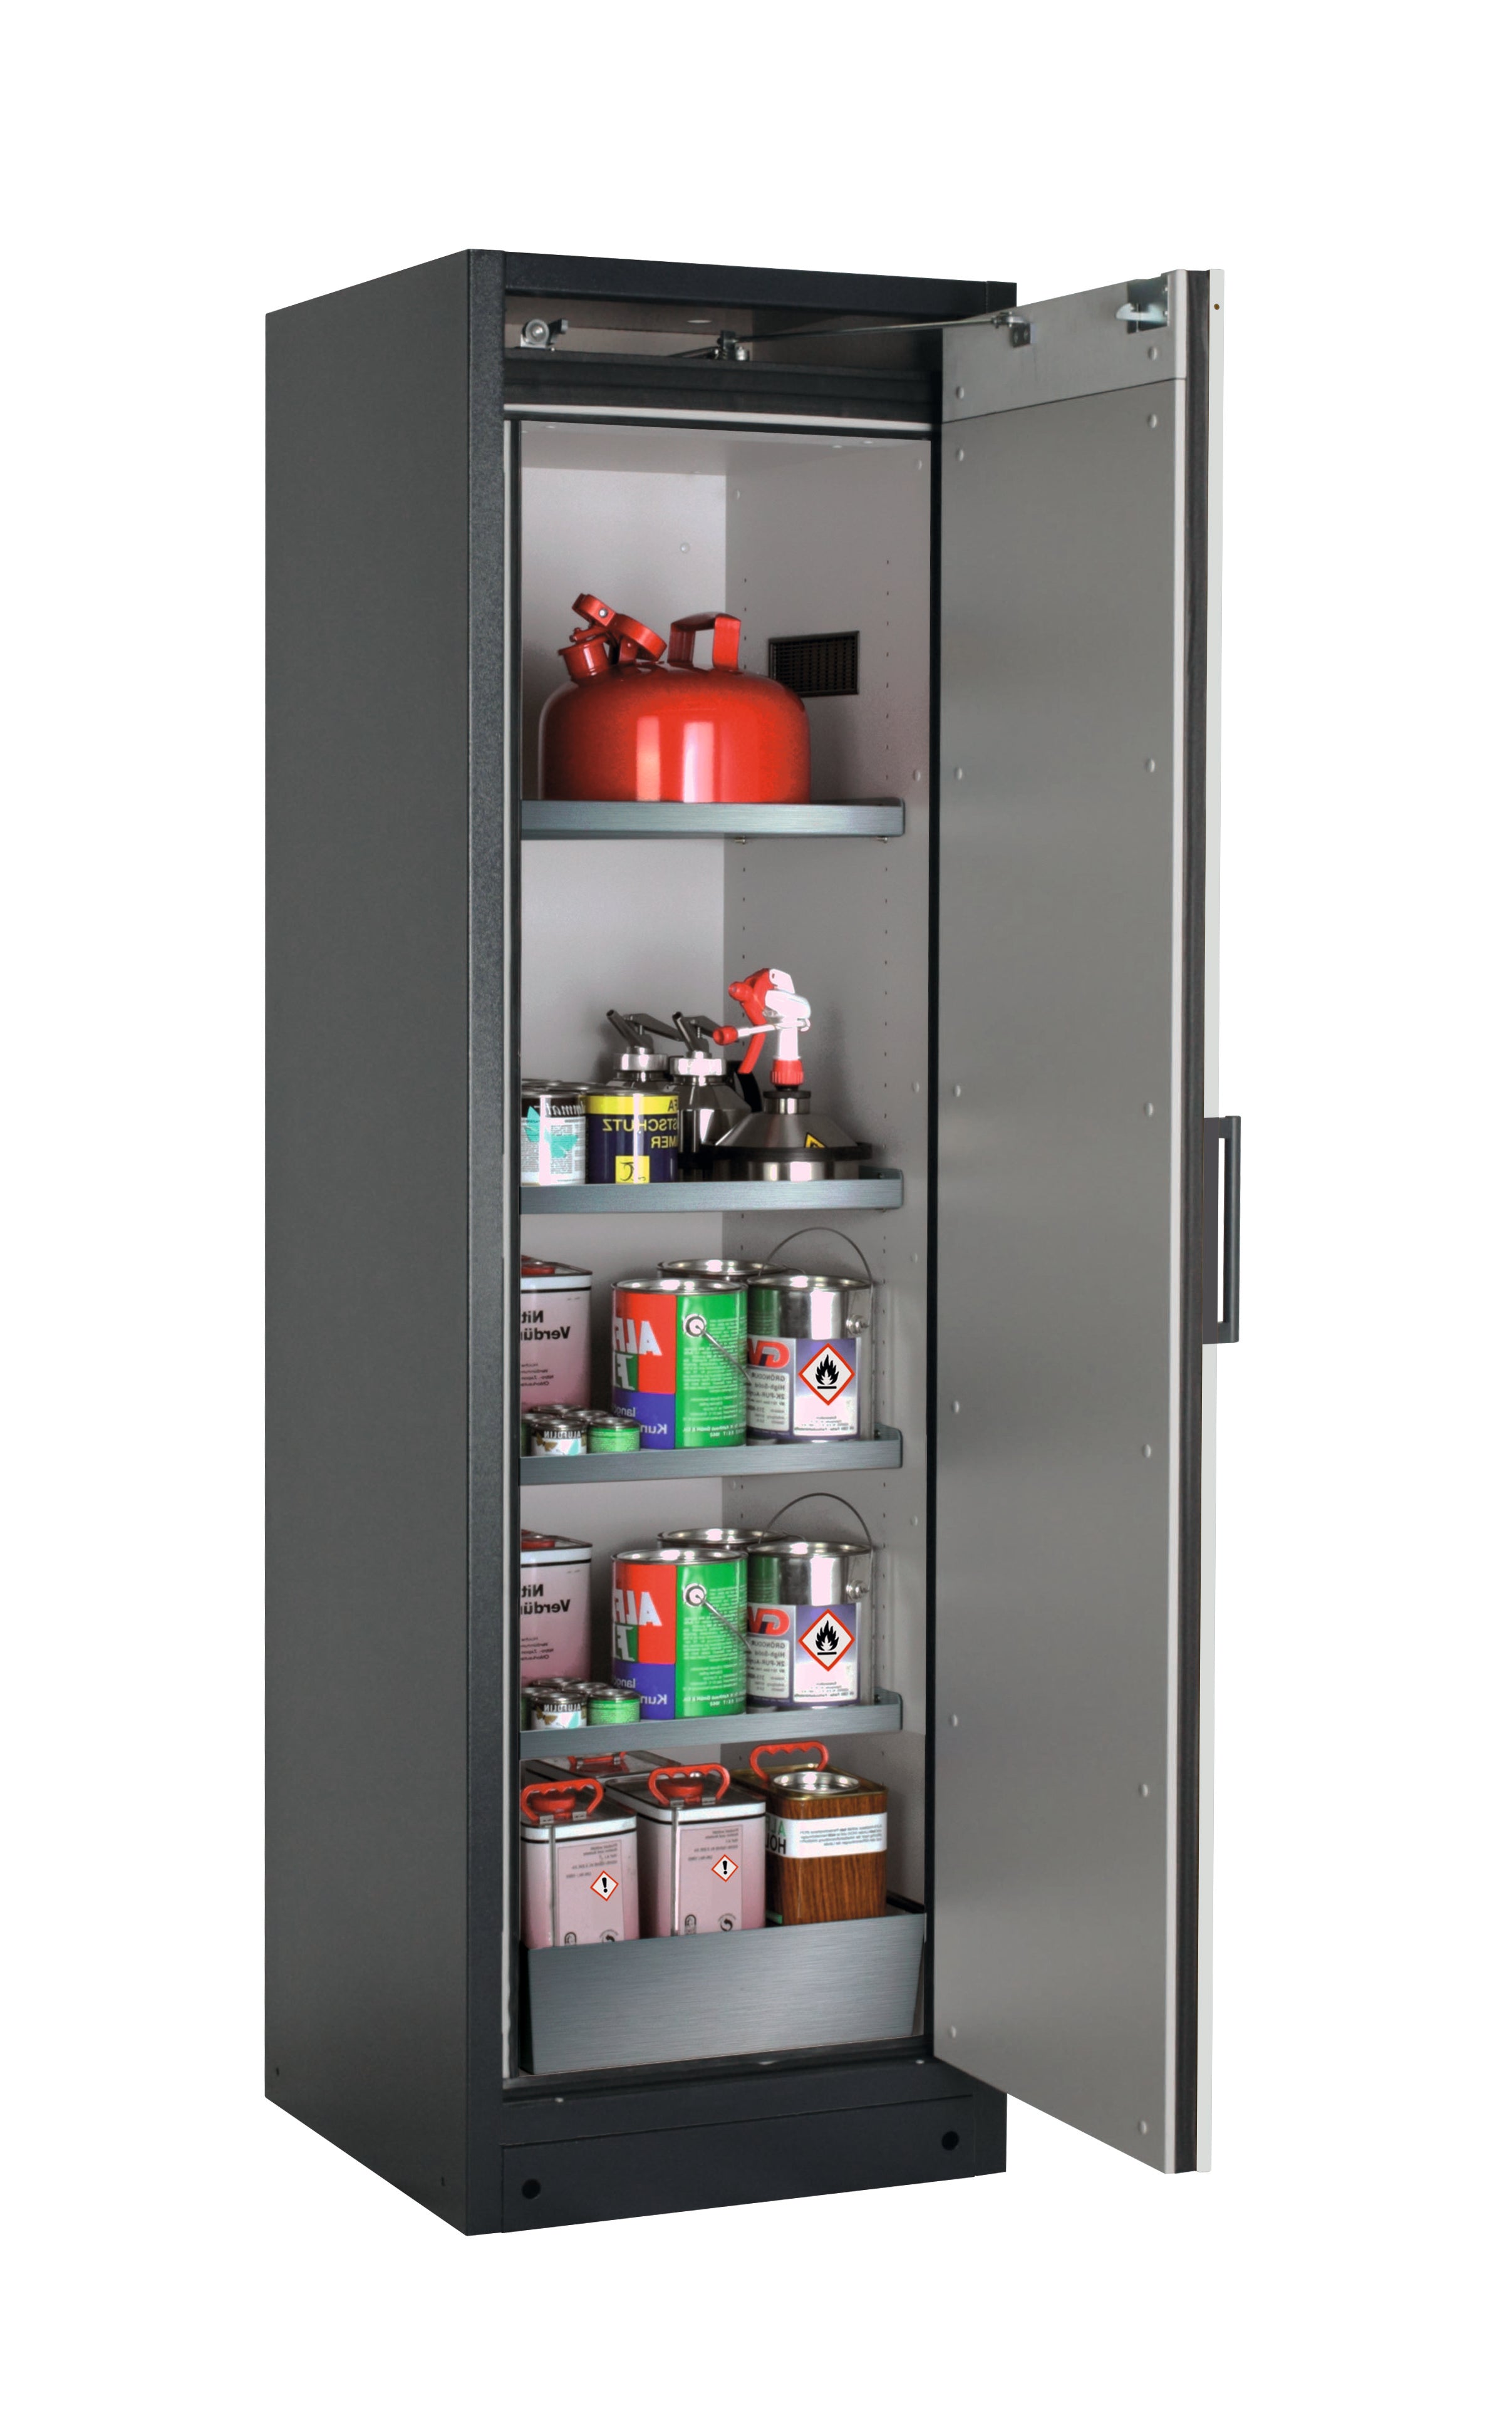 Type 90 safety storage cabinet Q-CLASSIC-90 model Q90.195.060.R in light grey RAL 7035 with 4x shelf standard (stainless steel 1.4301),